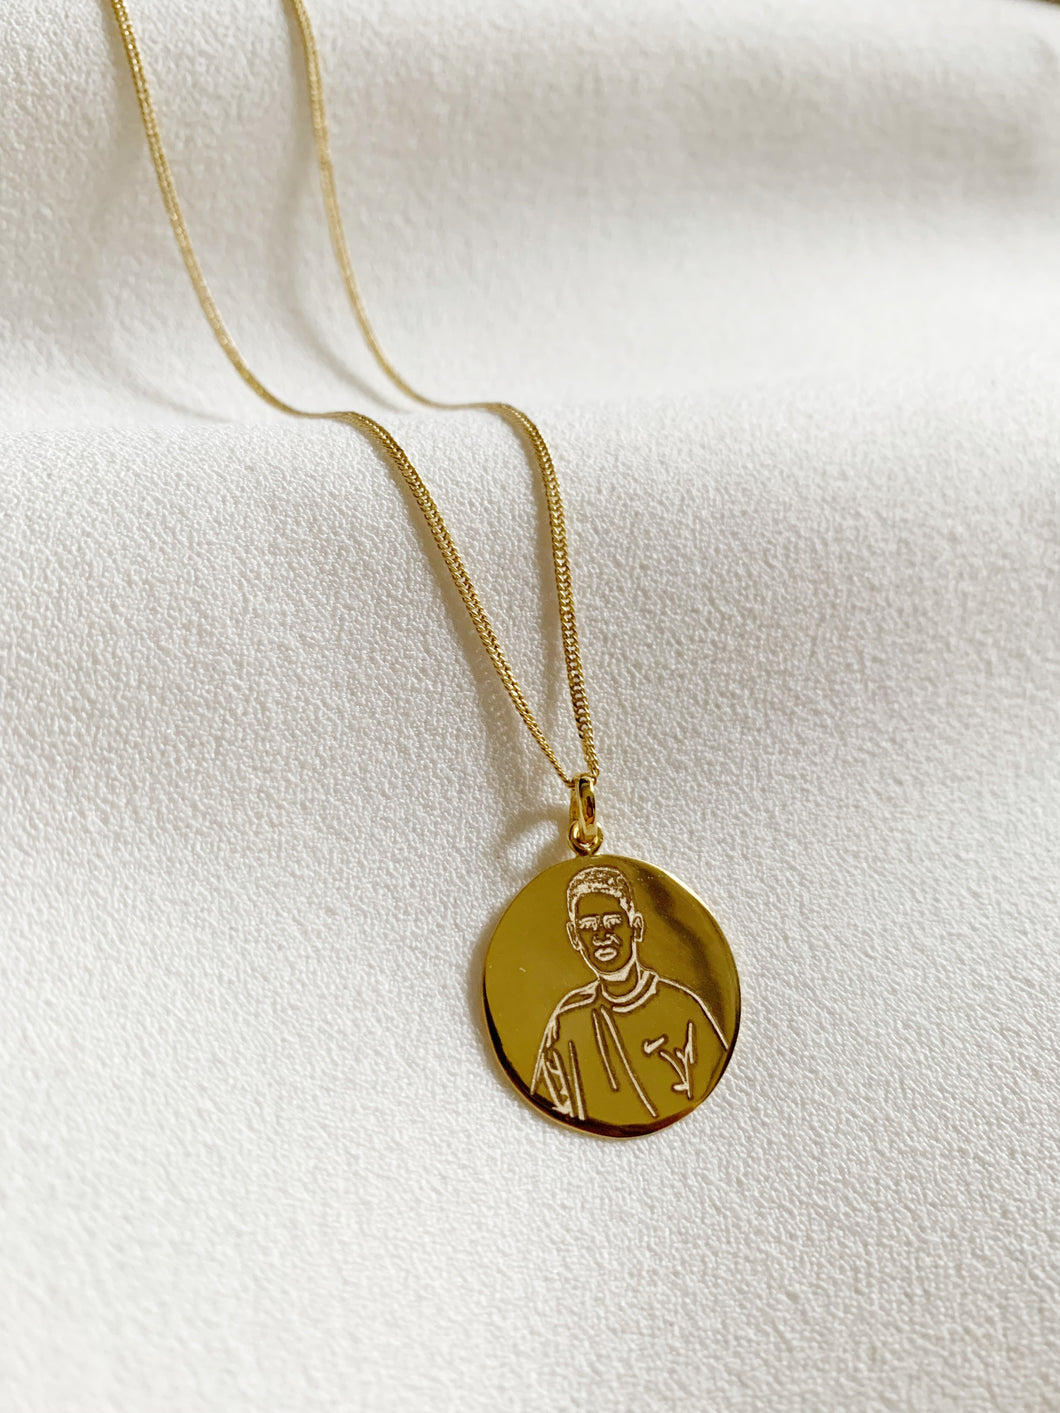 A round pendant with an engraved photo in it. Set in yellow gold.